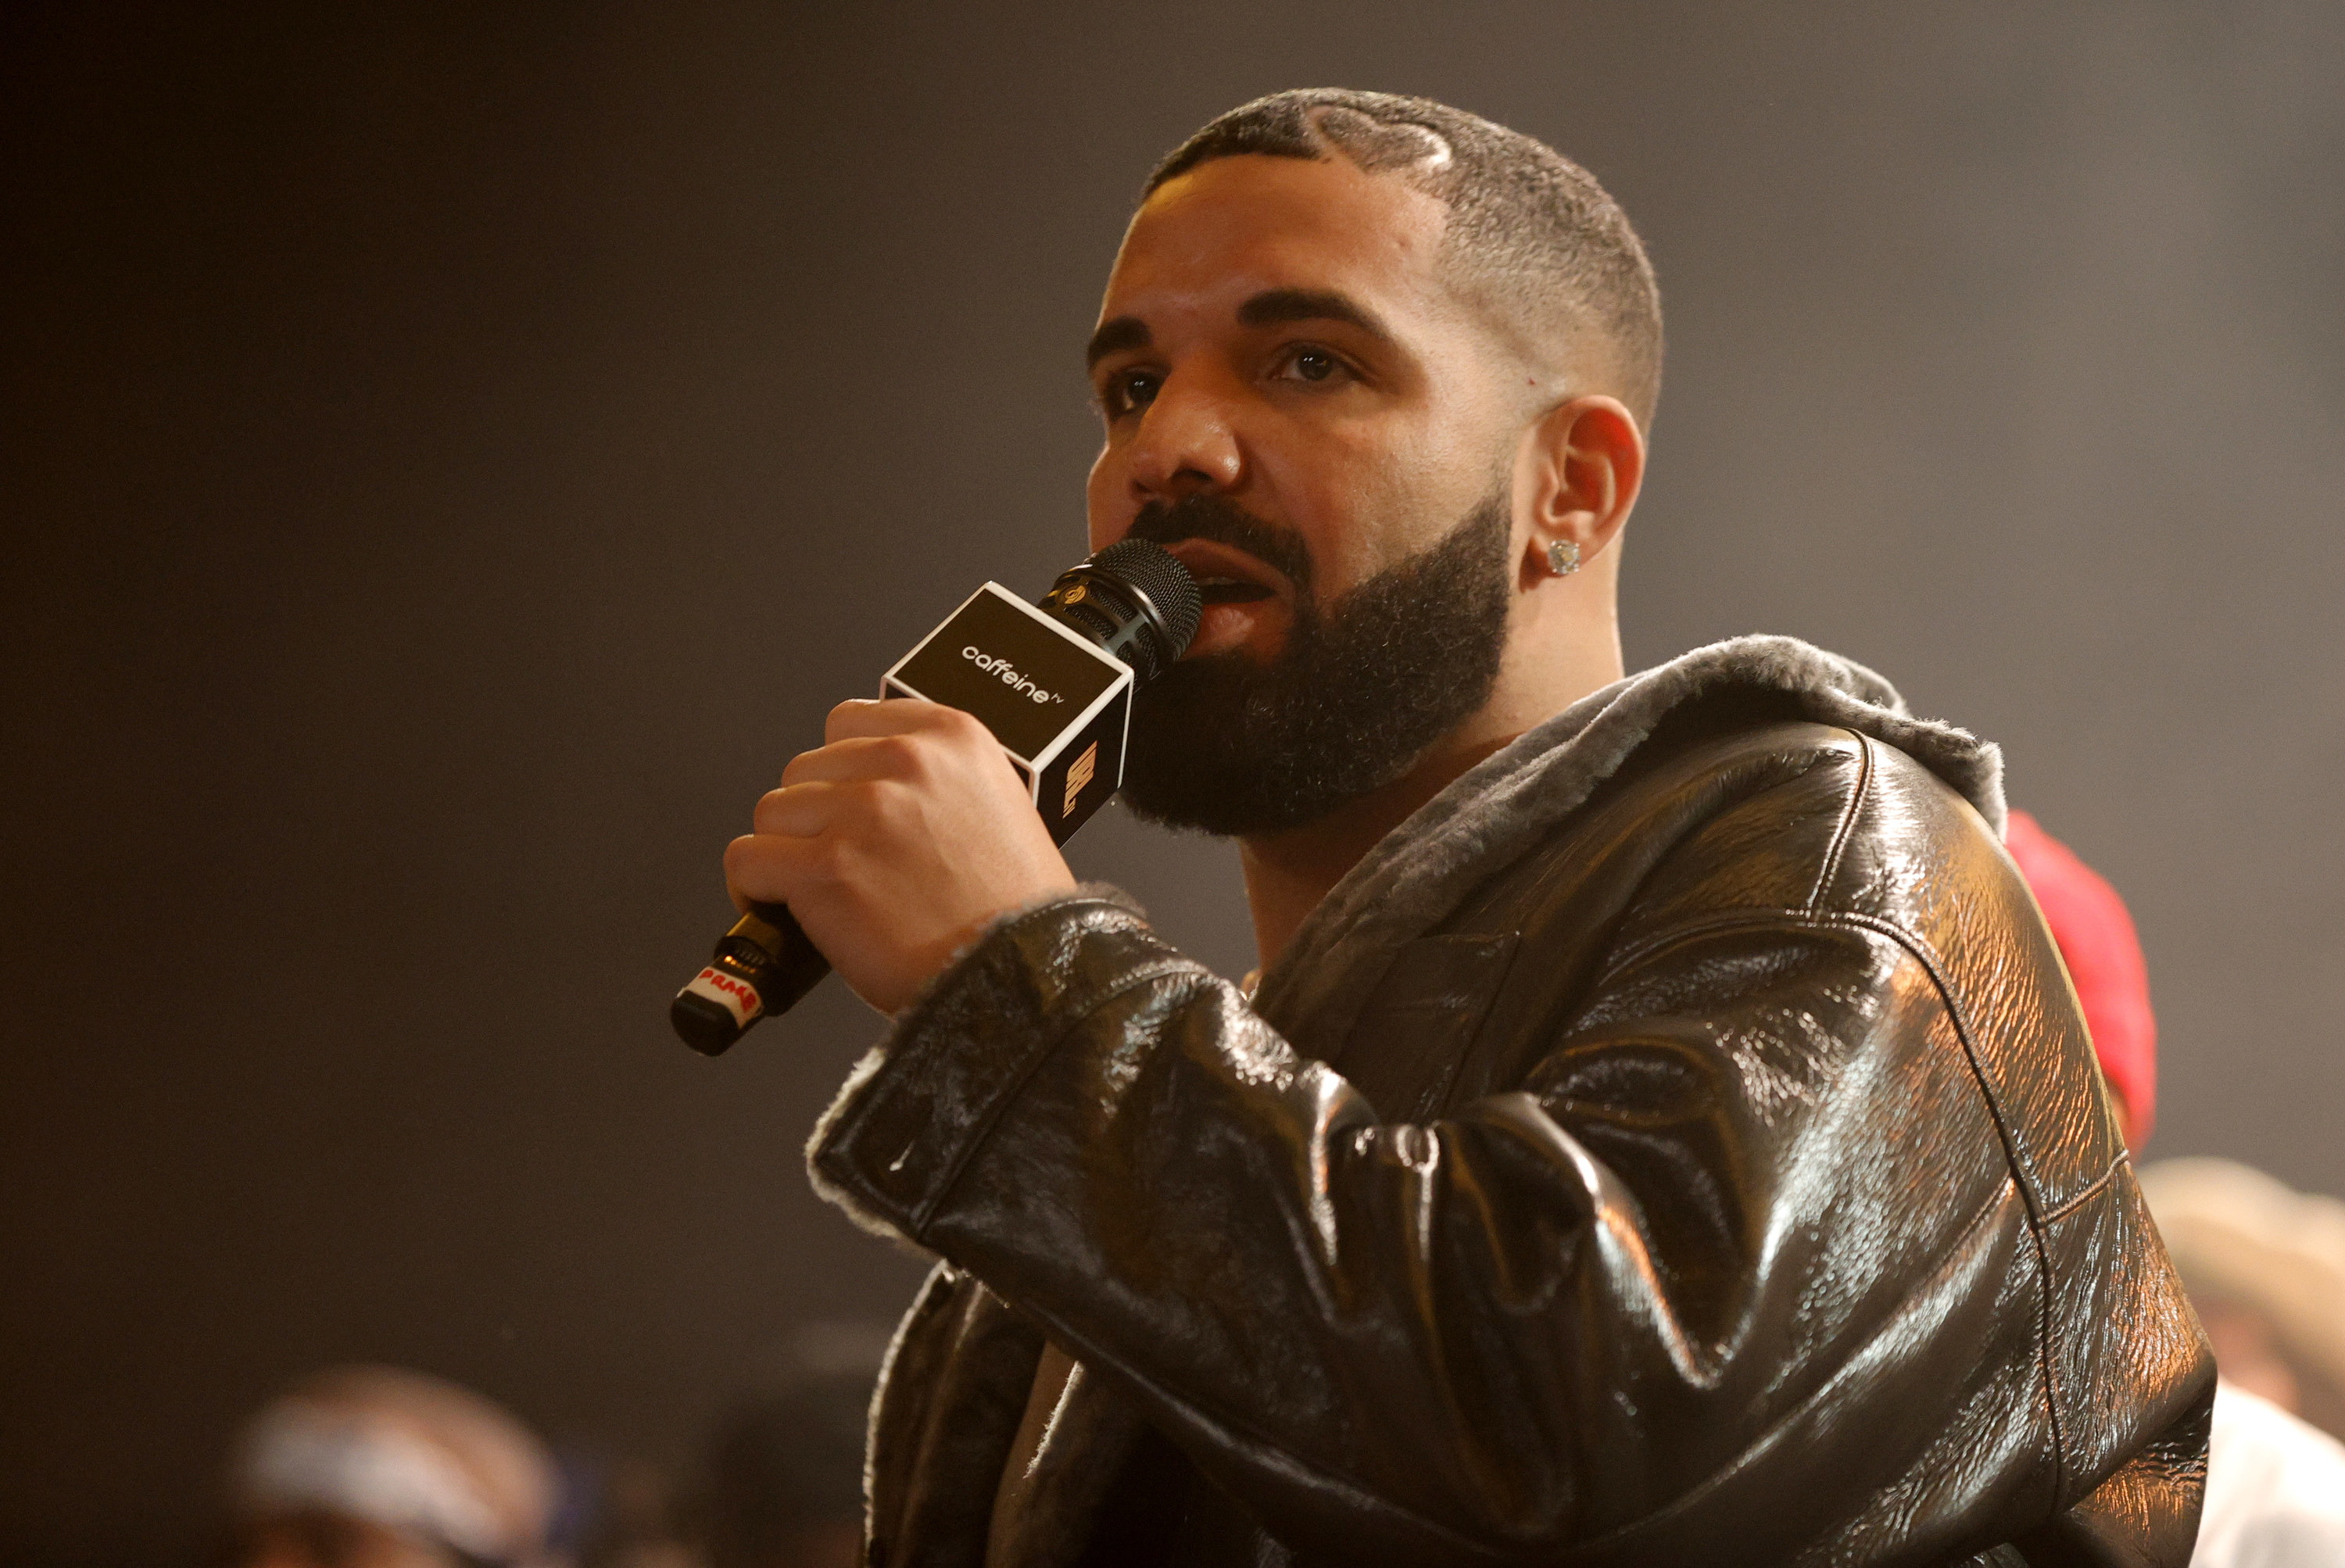 Drake holding a microphone and wearing a leather jacket.